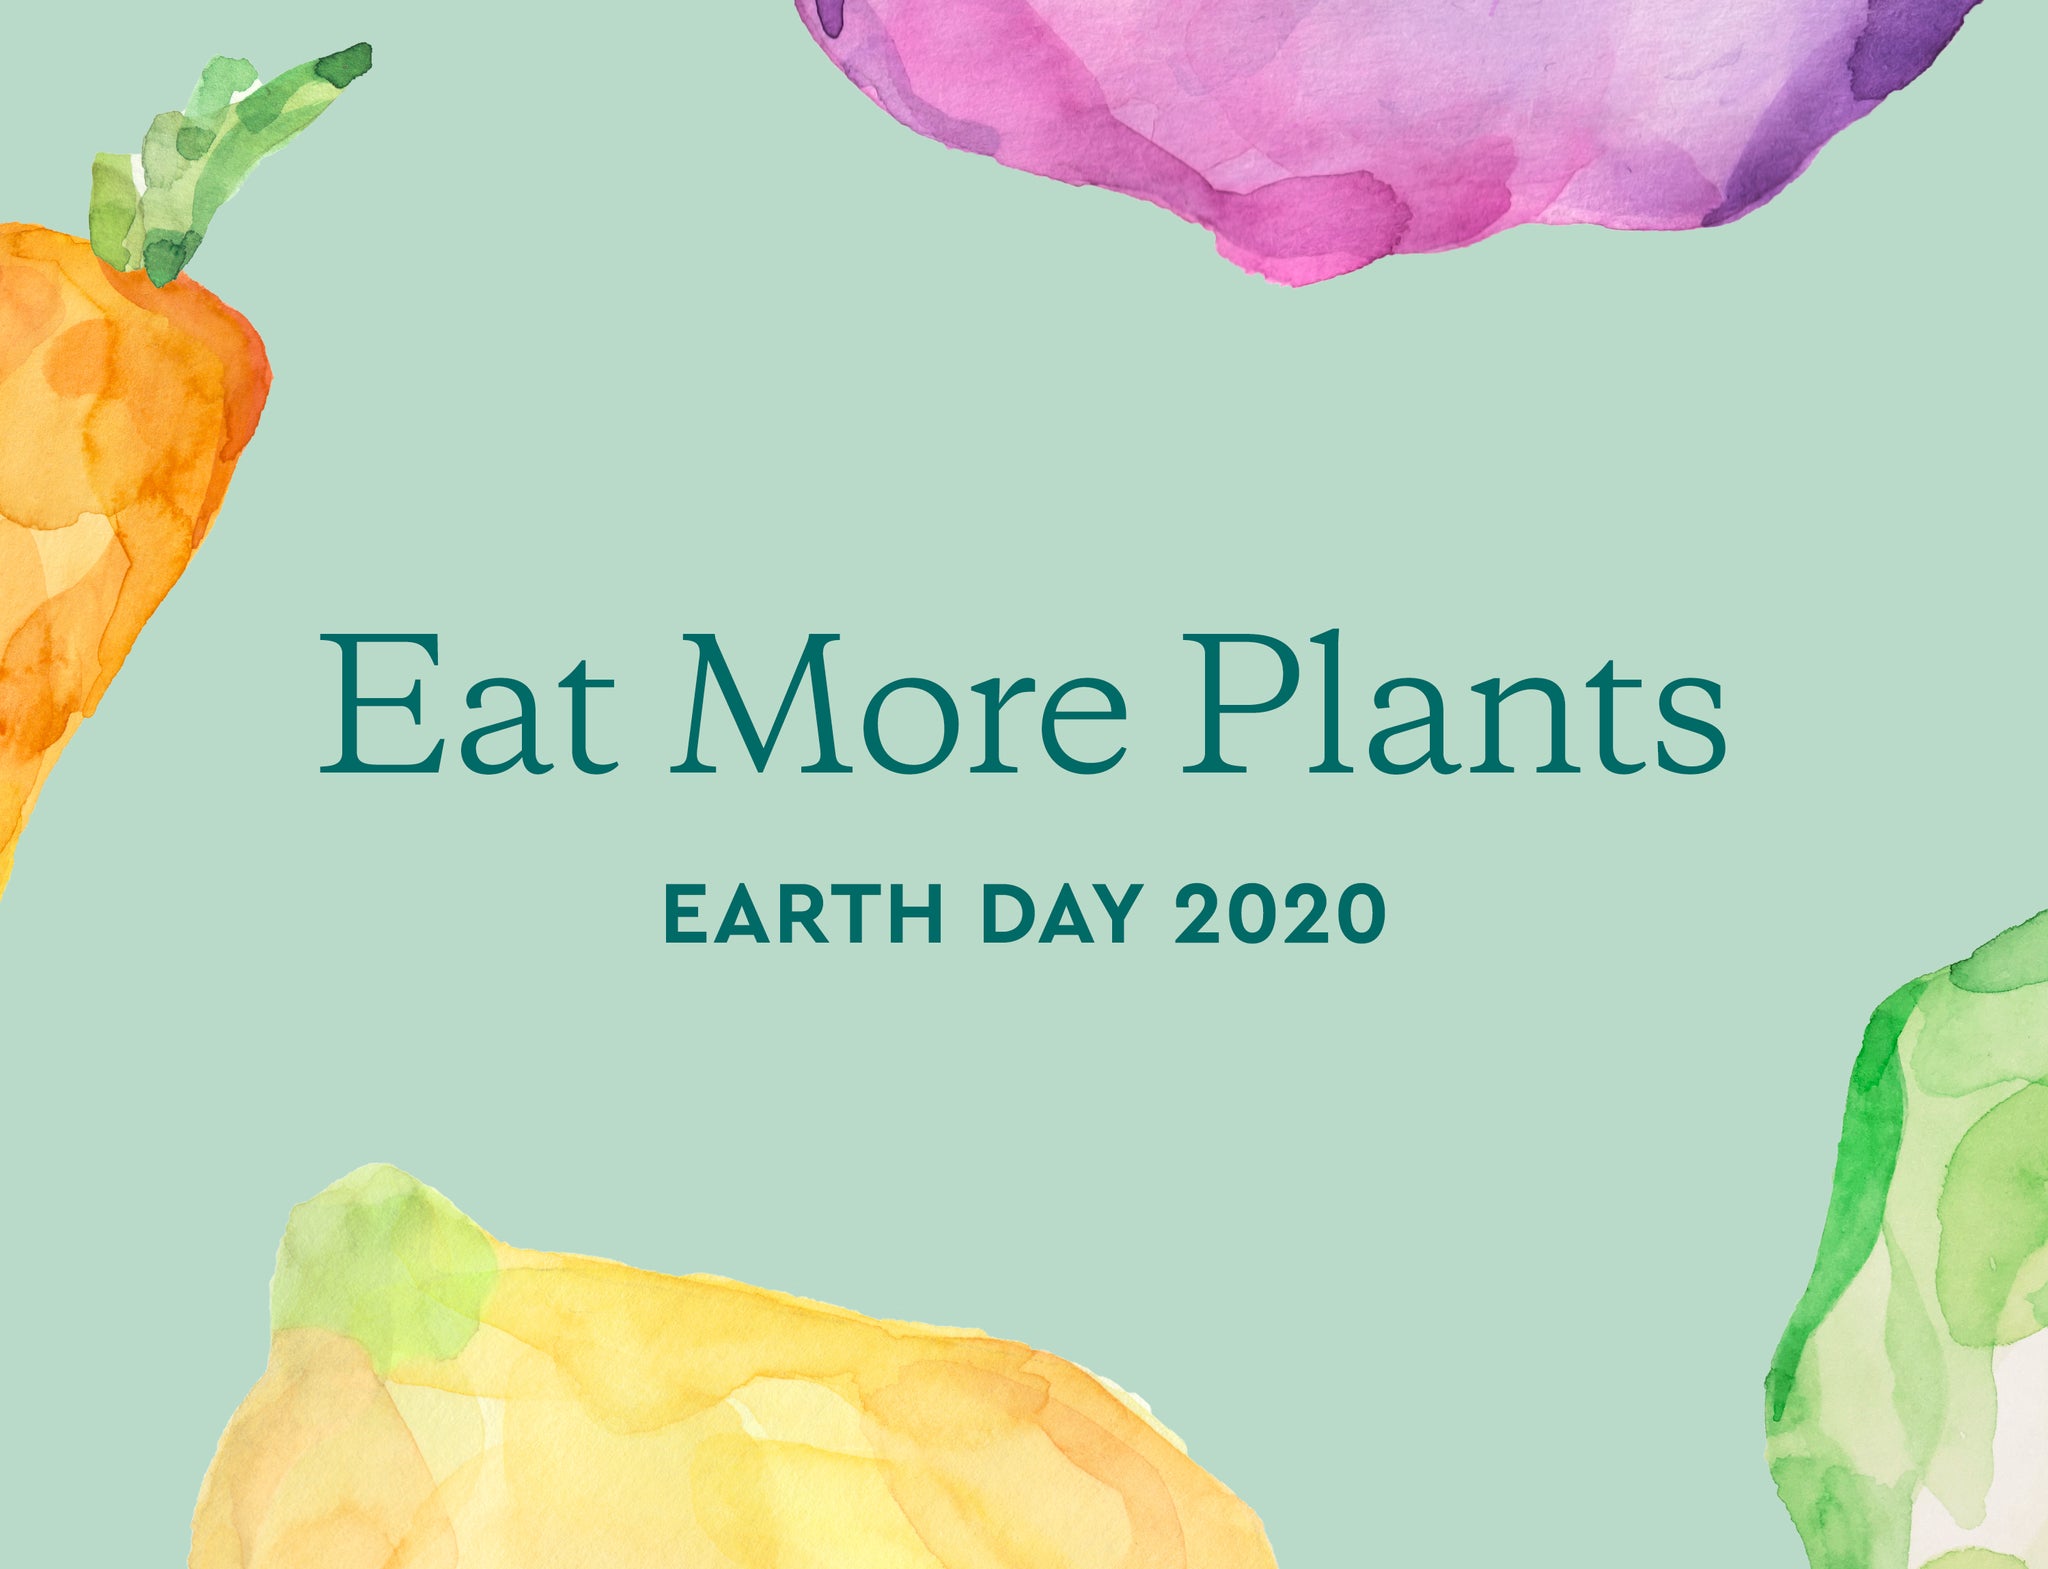 Why Eating More Plants Is Good for the Environment